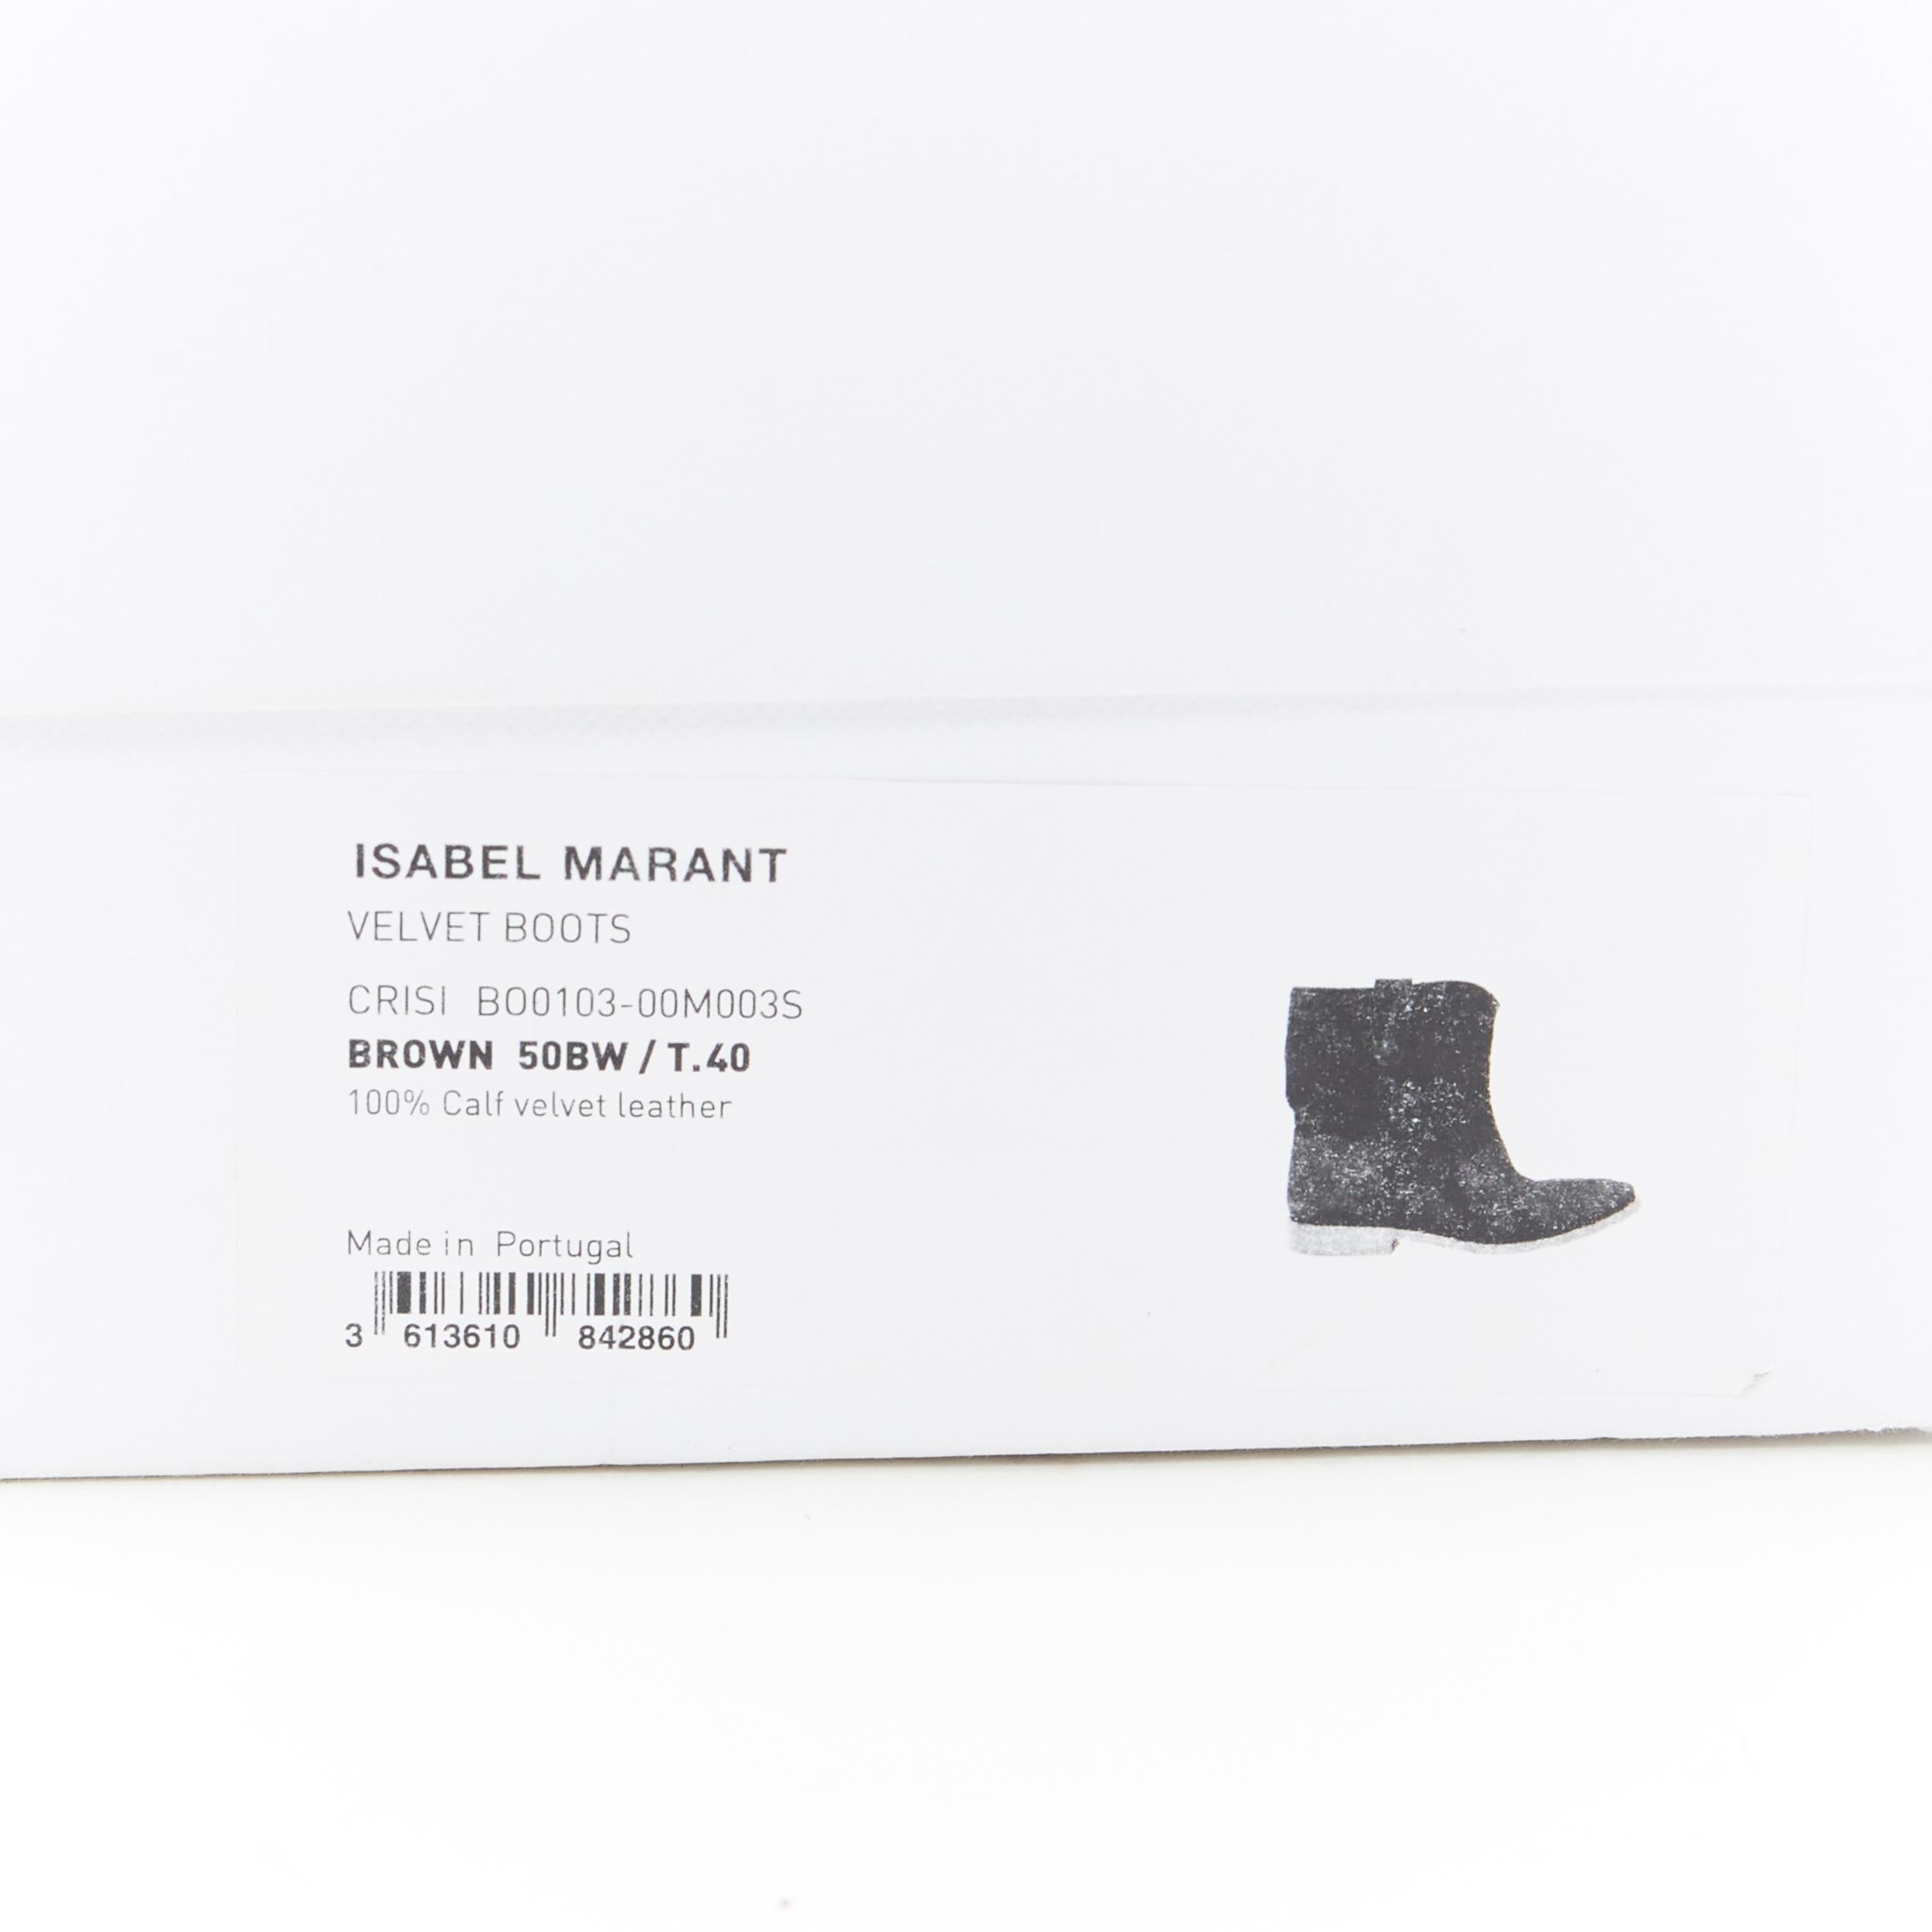 new ISABEL MARANT Crisi Taupe Olive suede concealed wedge western boots EU40 7